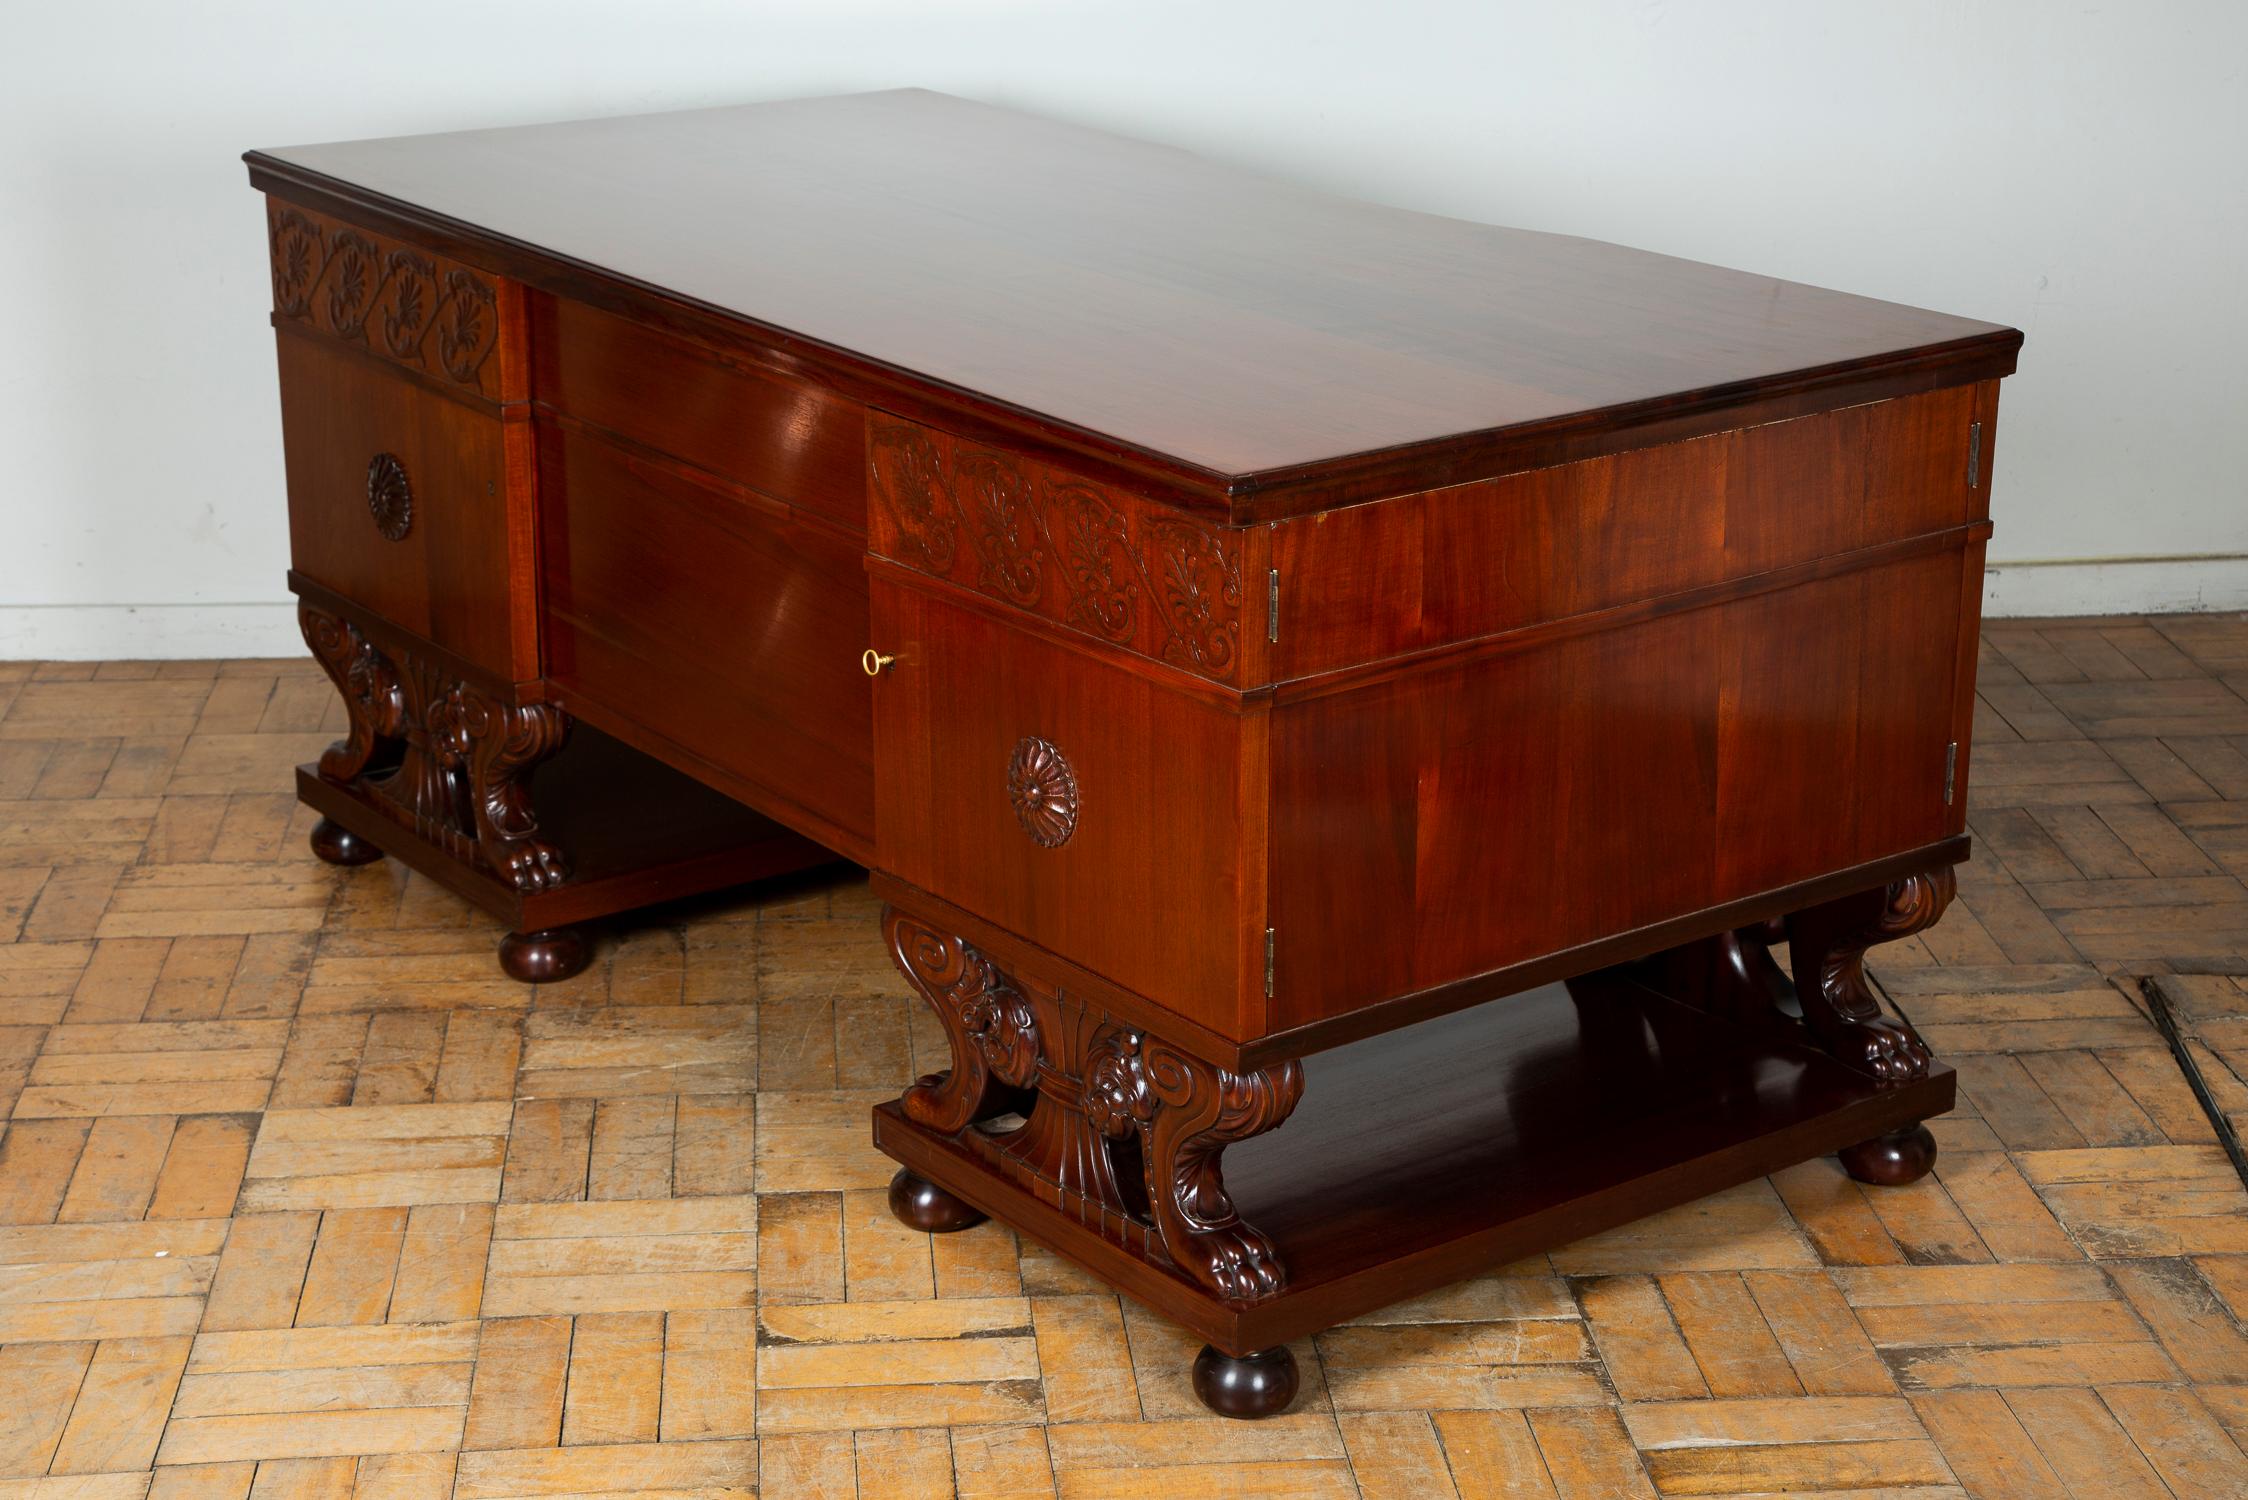 A freestanding mahogany desk attributed to Lysberg and Hansen.

The desk is finely carved with floral motif and rosettes to each pedestal, the central drawer has a reeded pattern with a classical urn in the middle with the key hole.

Each